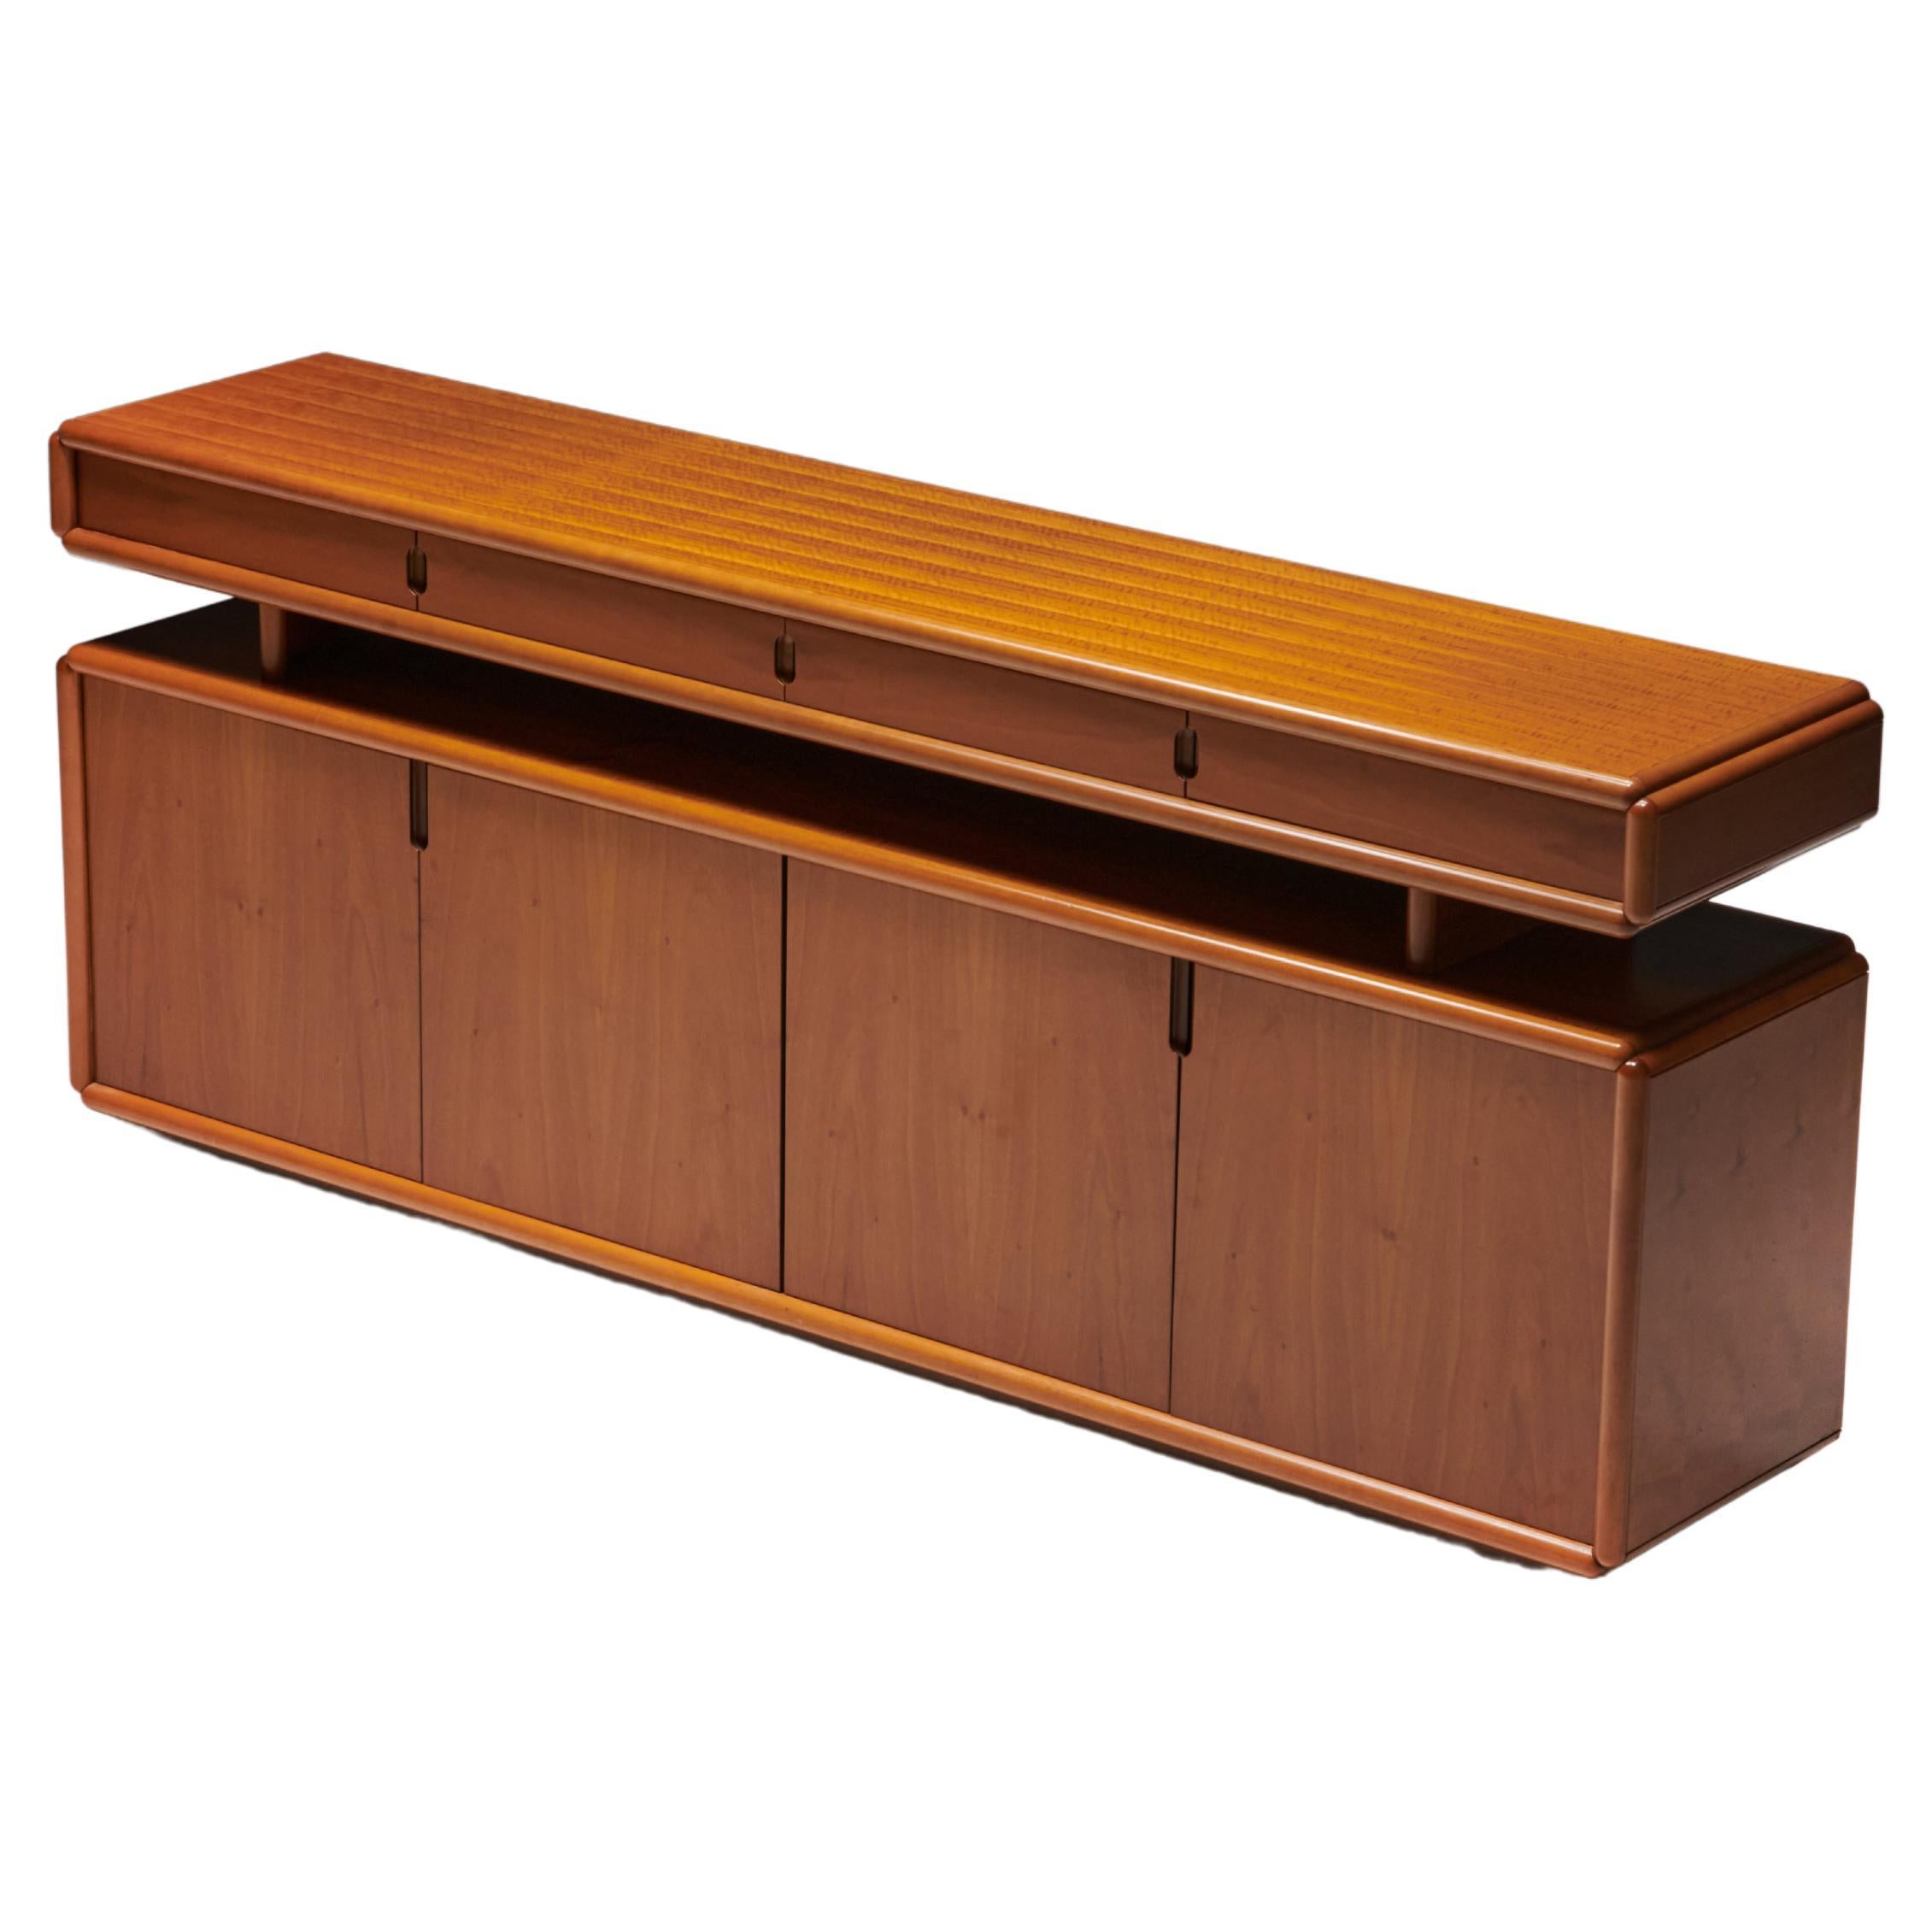 Postmodern Italian Sideboard in Canaletto Walnut, Italy, 1970s For Sale